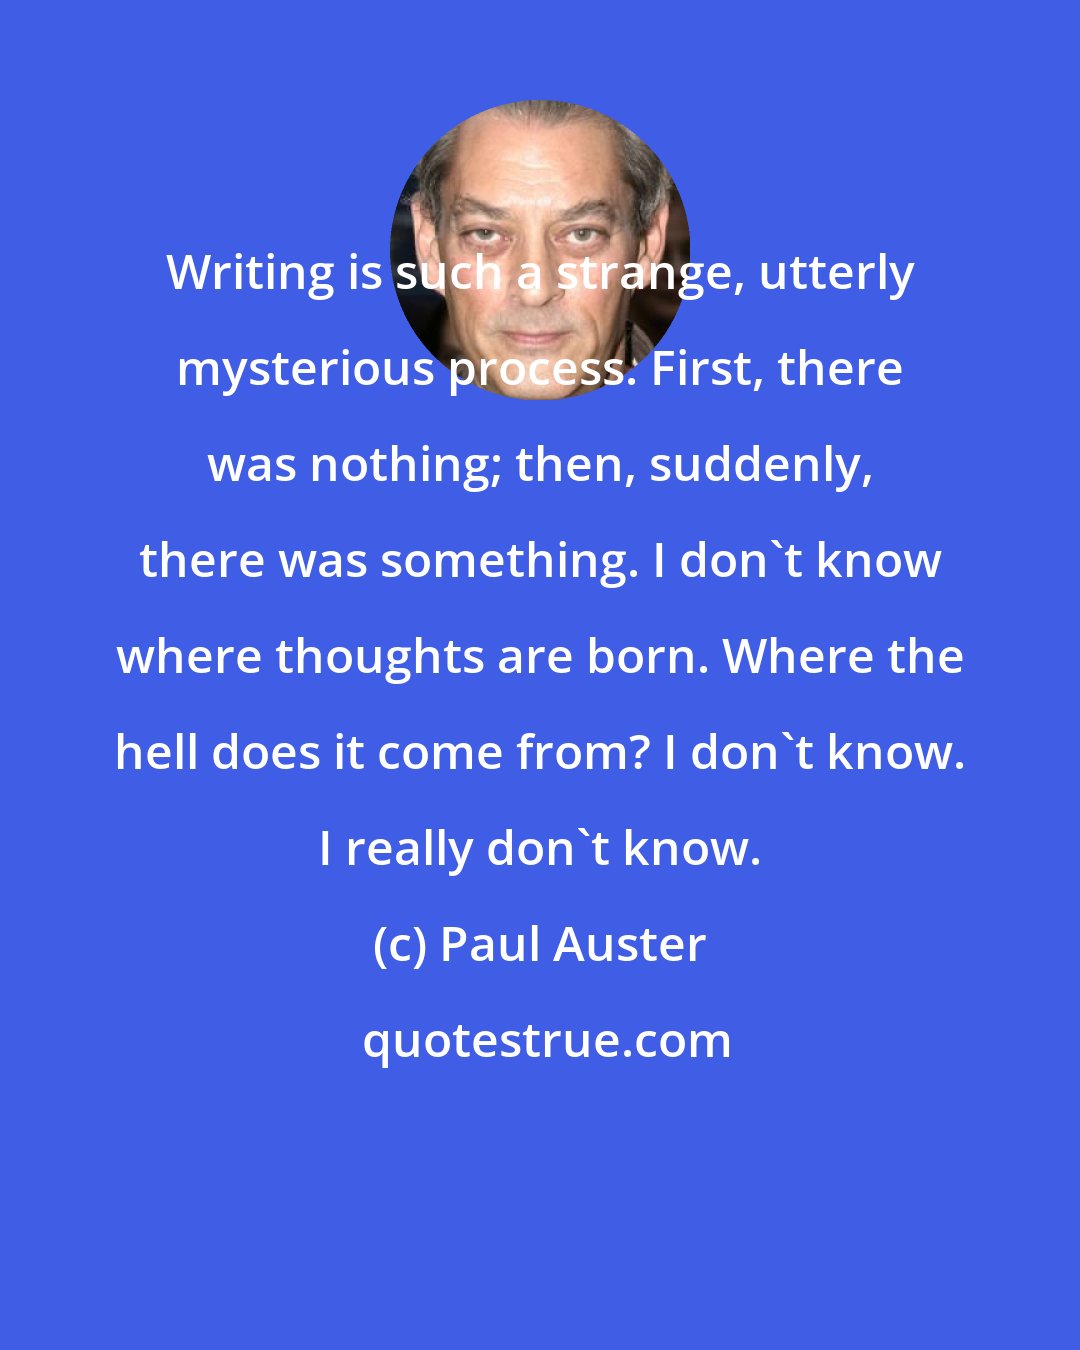 Paul Auster: Writing is such a strange, utterly mysterious process. First, there was nothing; then, suddenly, there was something. I don't know where thoughts are born. Where the hell does it come from? I don't know. I really don't know.